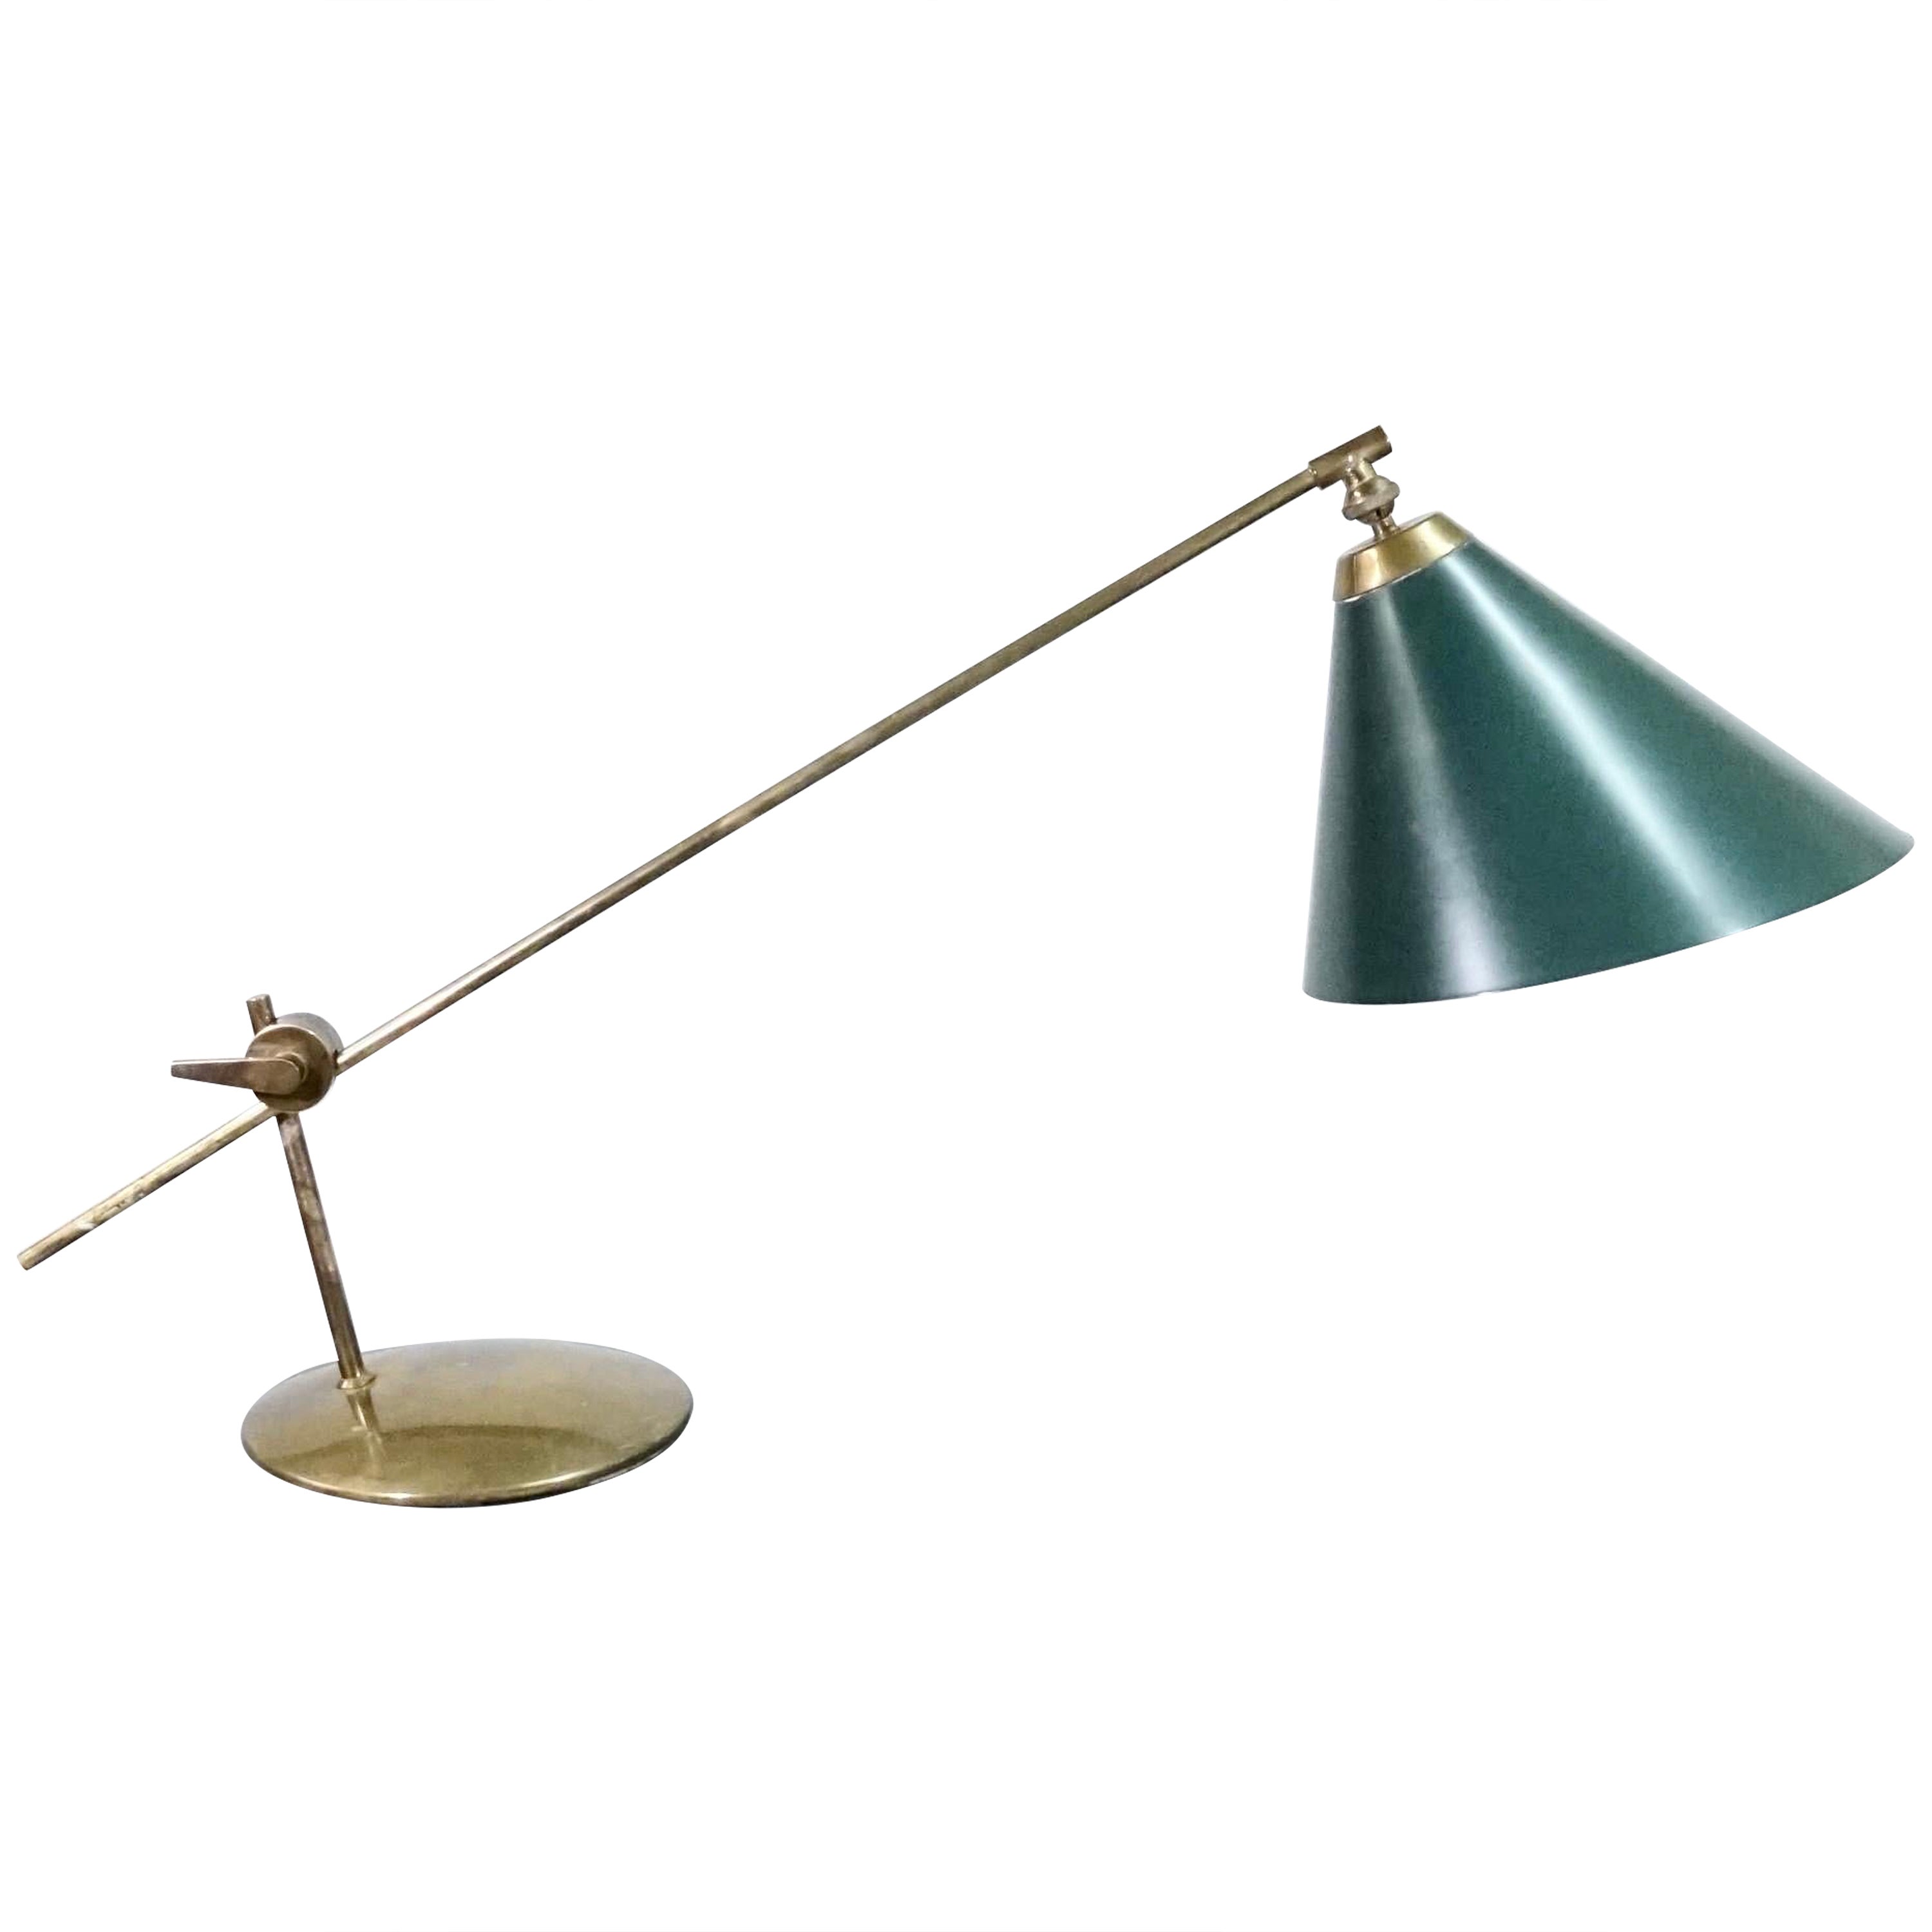 TH Valentiner Brass Water Pump Table Lamp